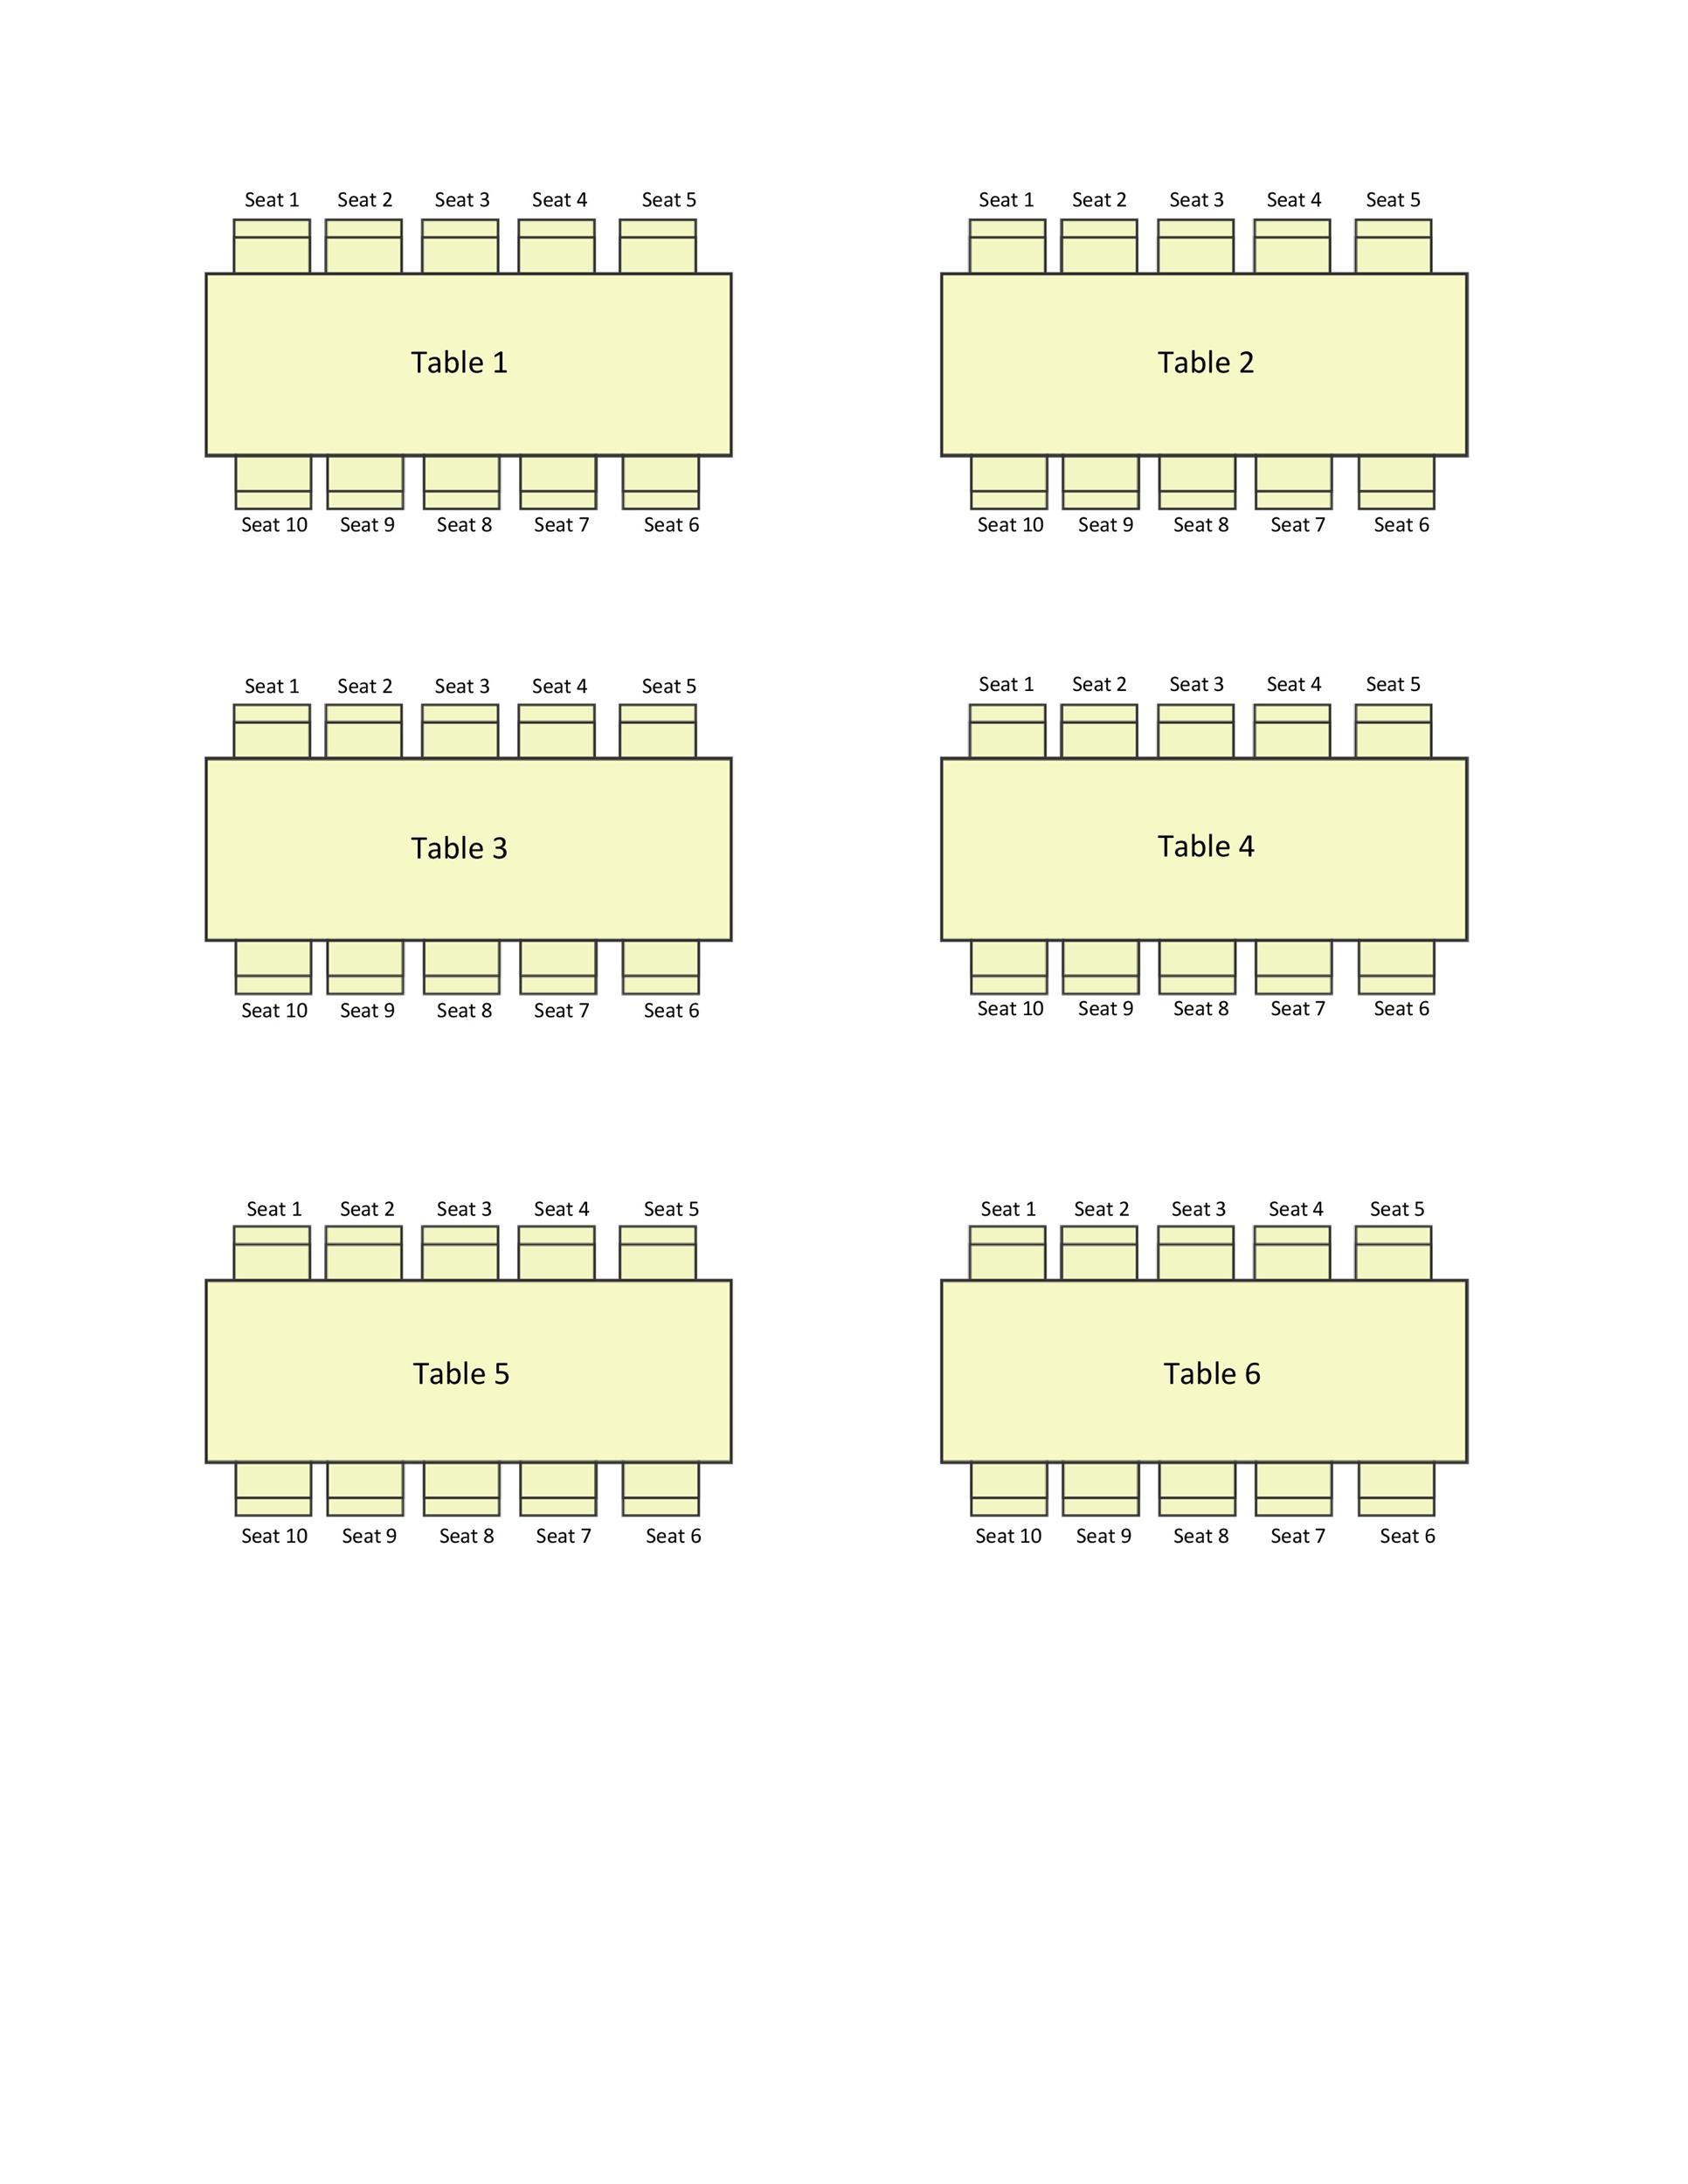 Wedding Seating Chart Template 10 Per Table